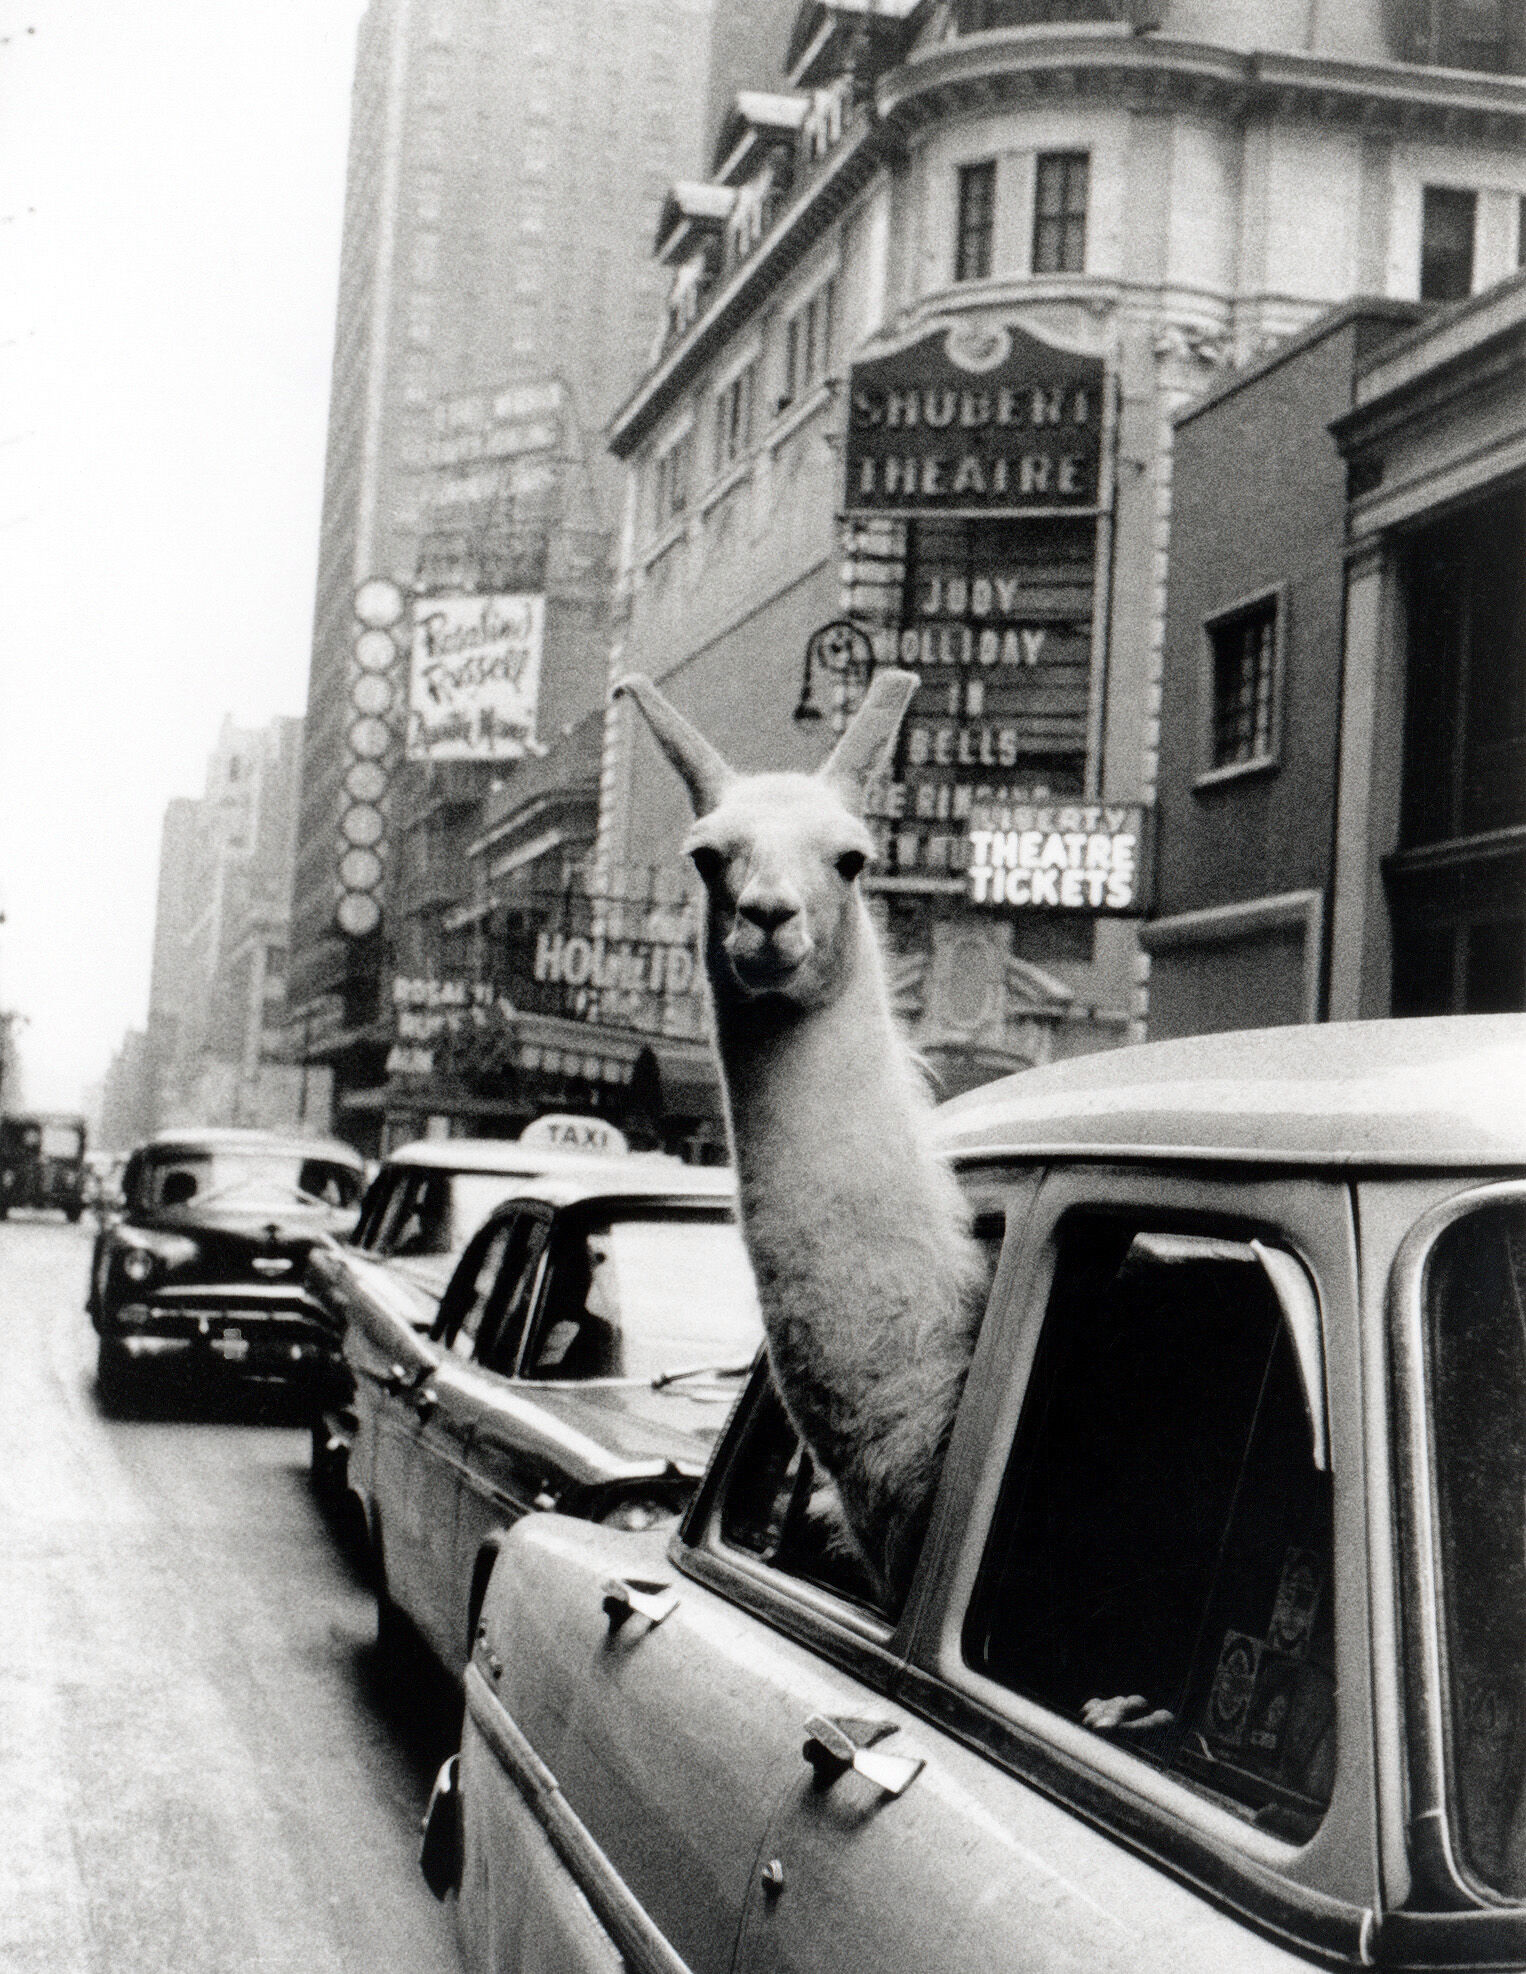 A Lama in Times Square, New York 1957